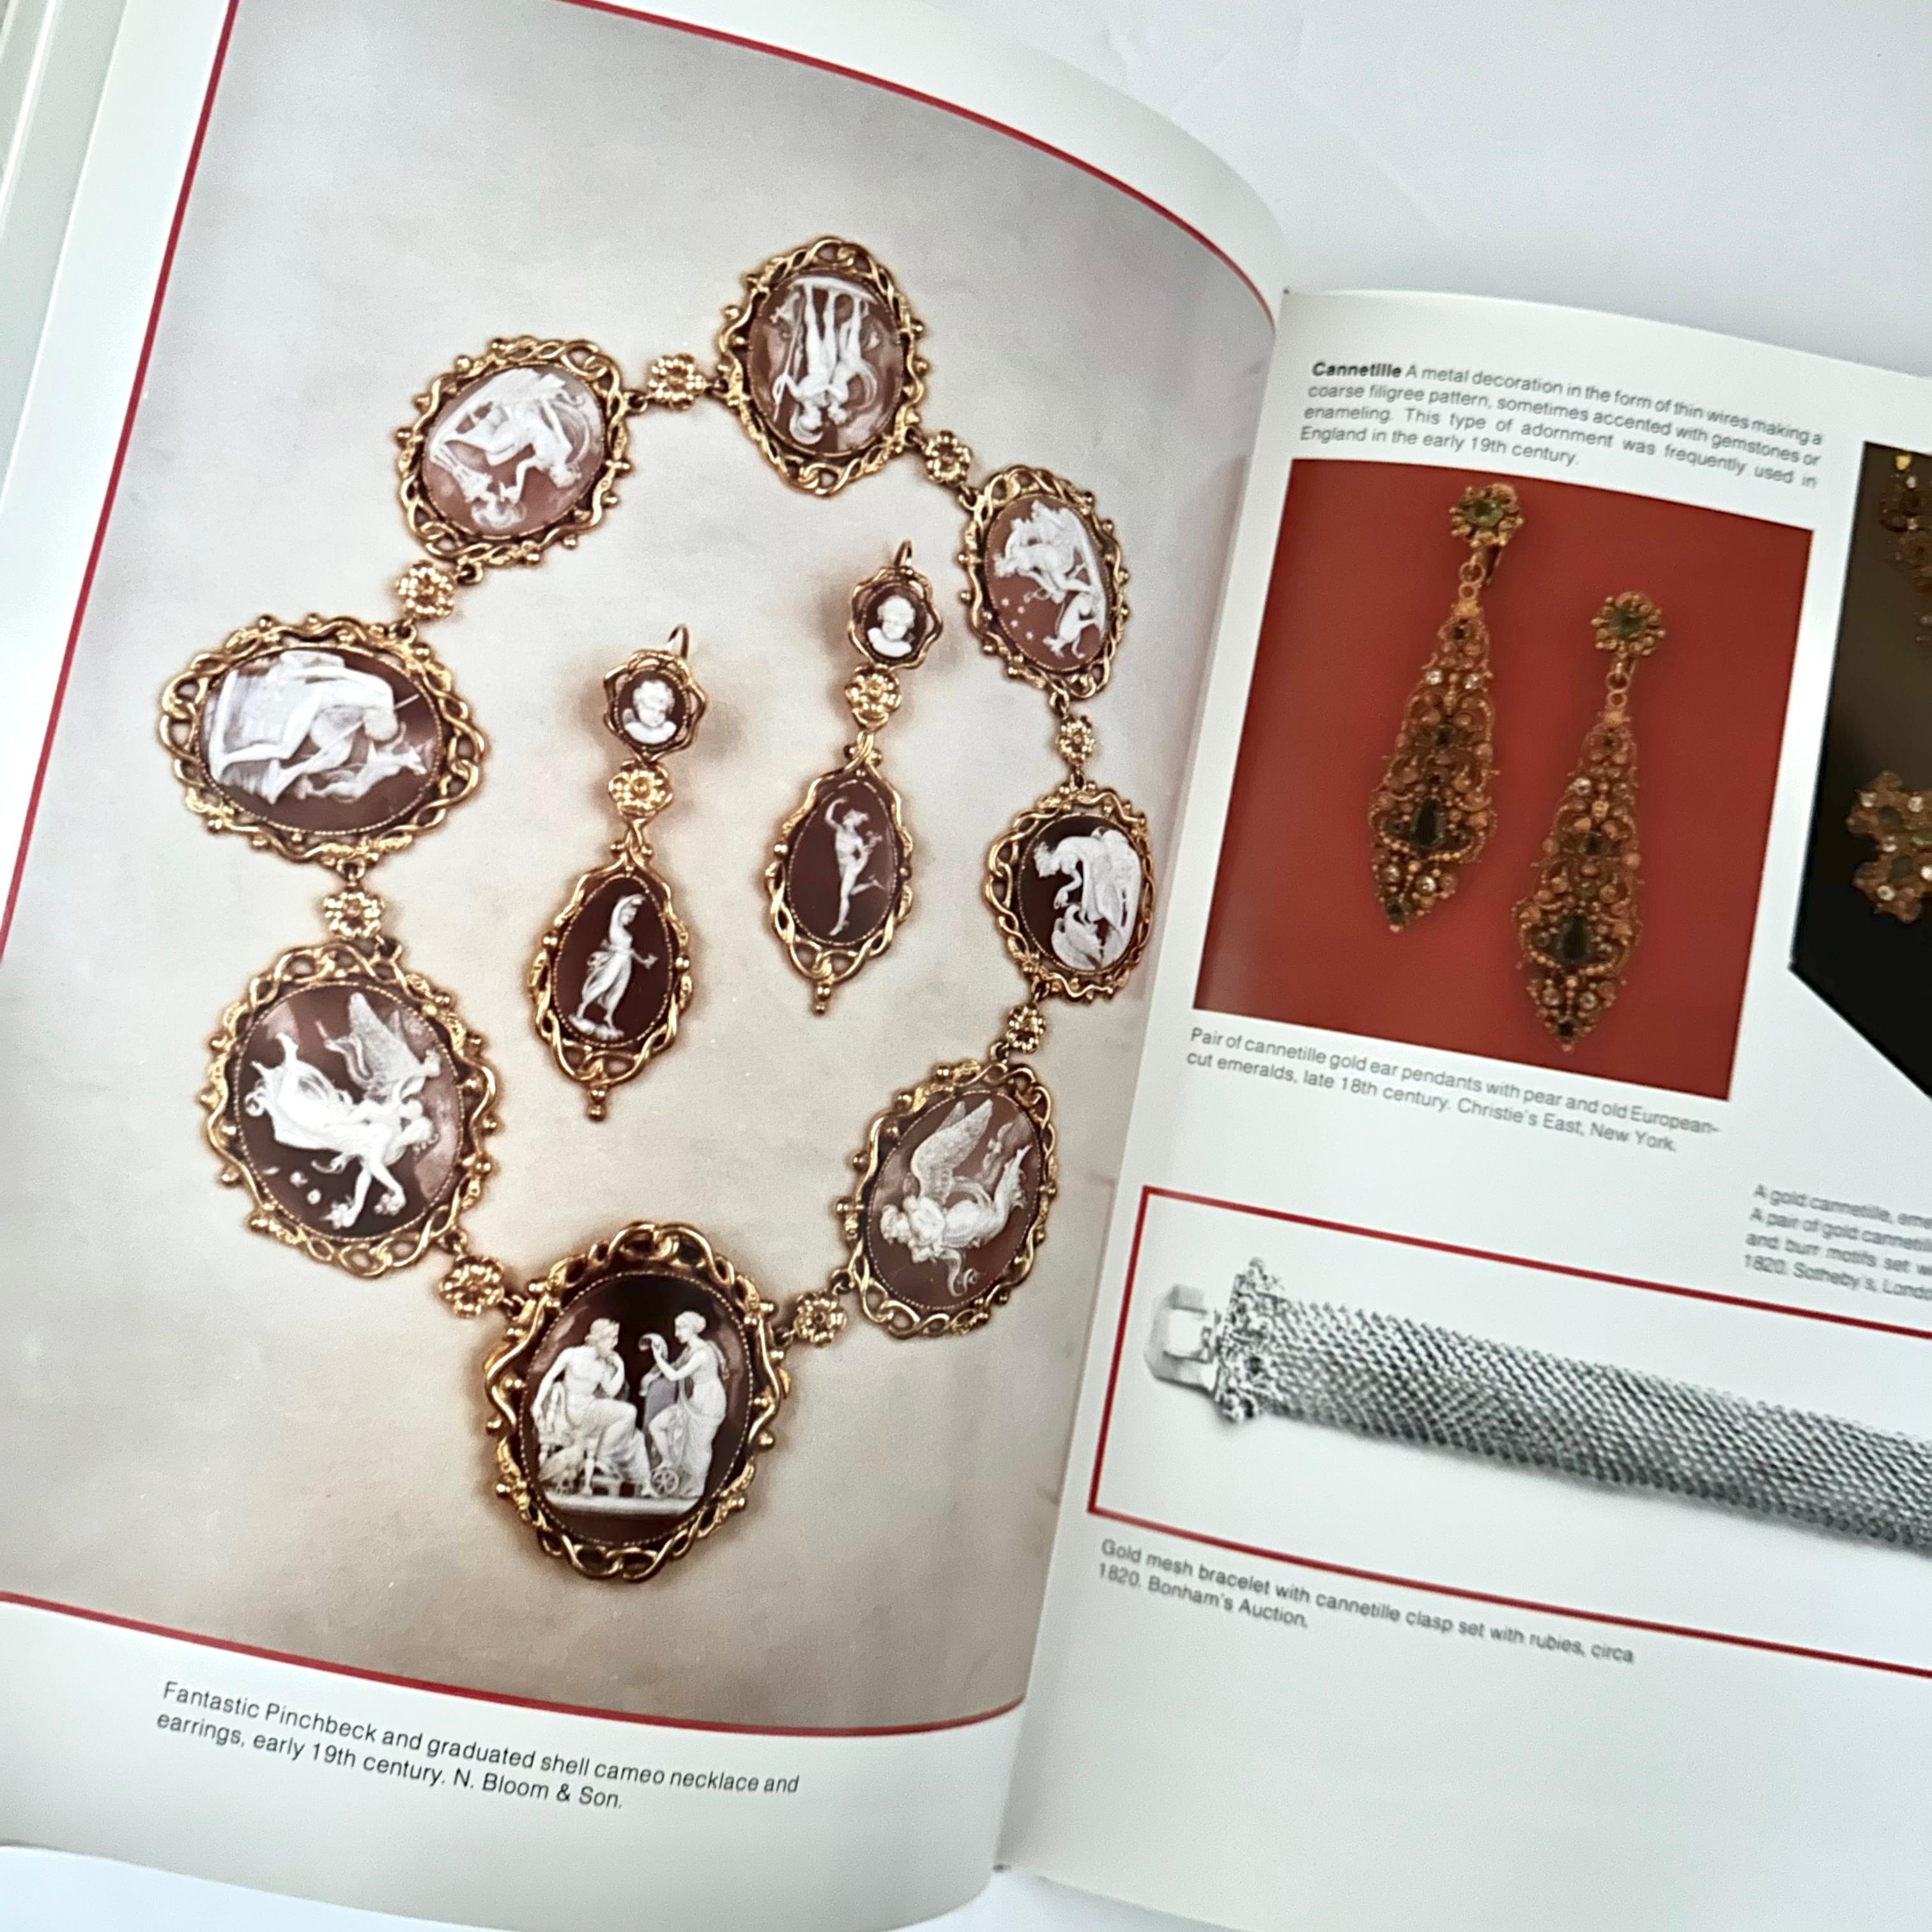 Published by Schiffer Publishing Ltd., 1st edition, 1991. Hardback with English text.

This encyclopaedic handbook is organised in alphabetical order. Illustrating every aspect of the marvels jewellery has to offer. It’s an easy-to-use and highly